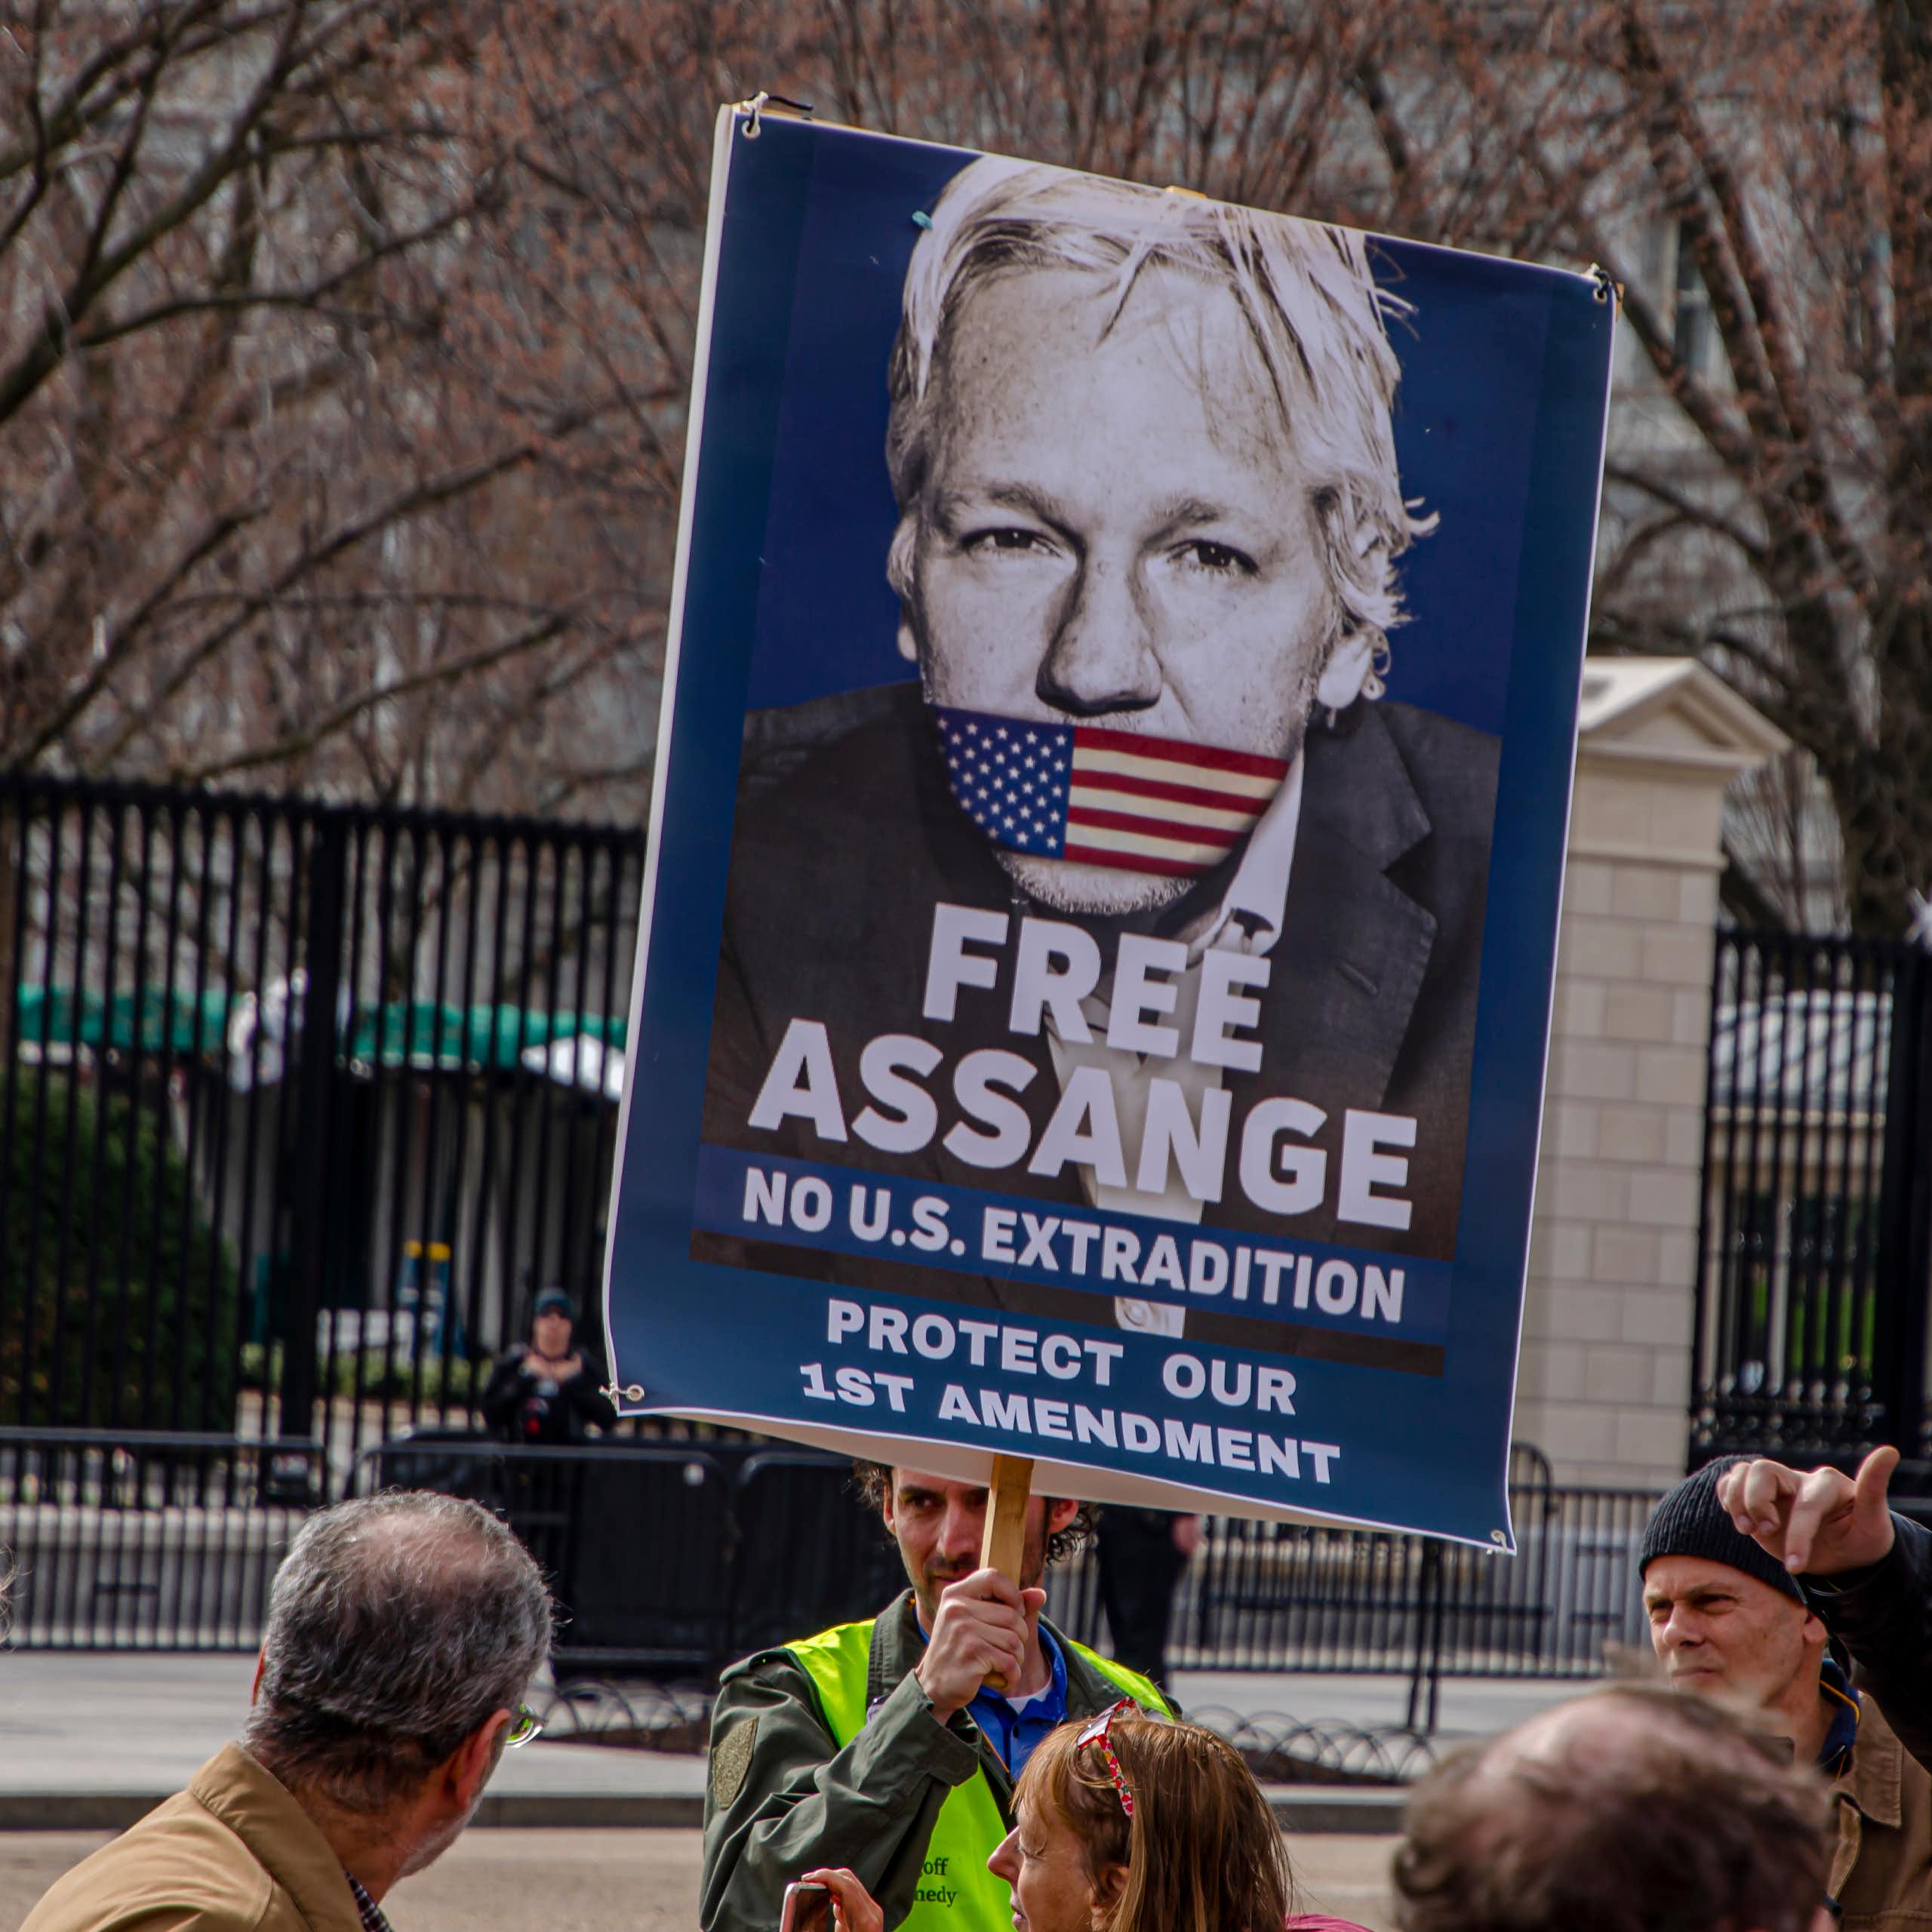 A sign depicts Assange with his mouth taped over